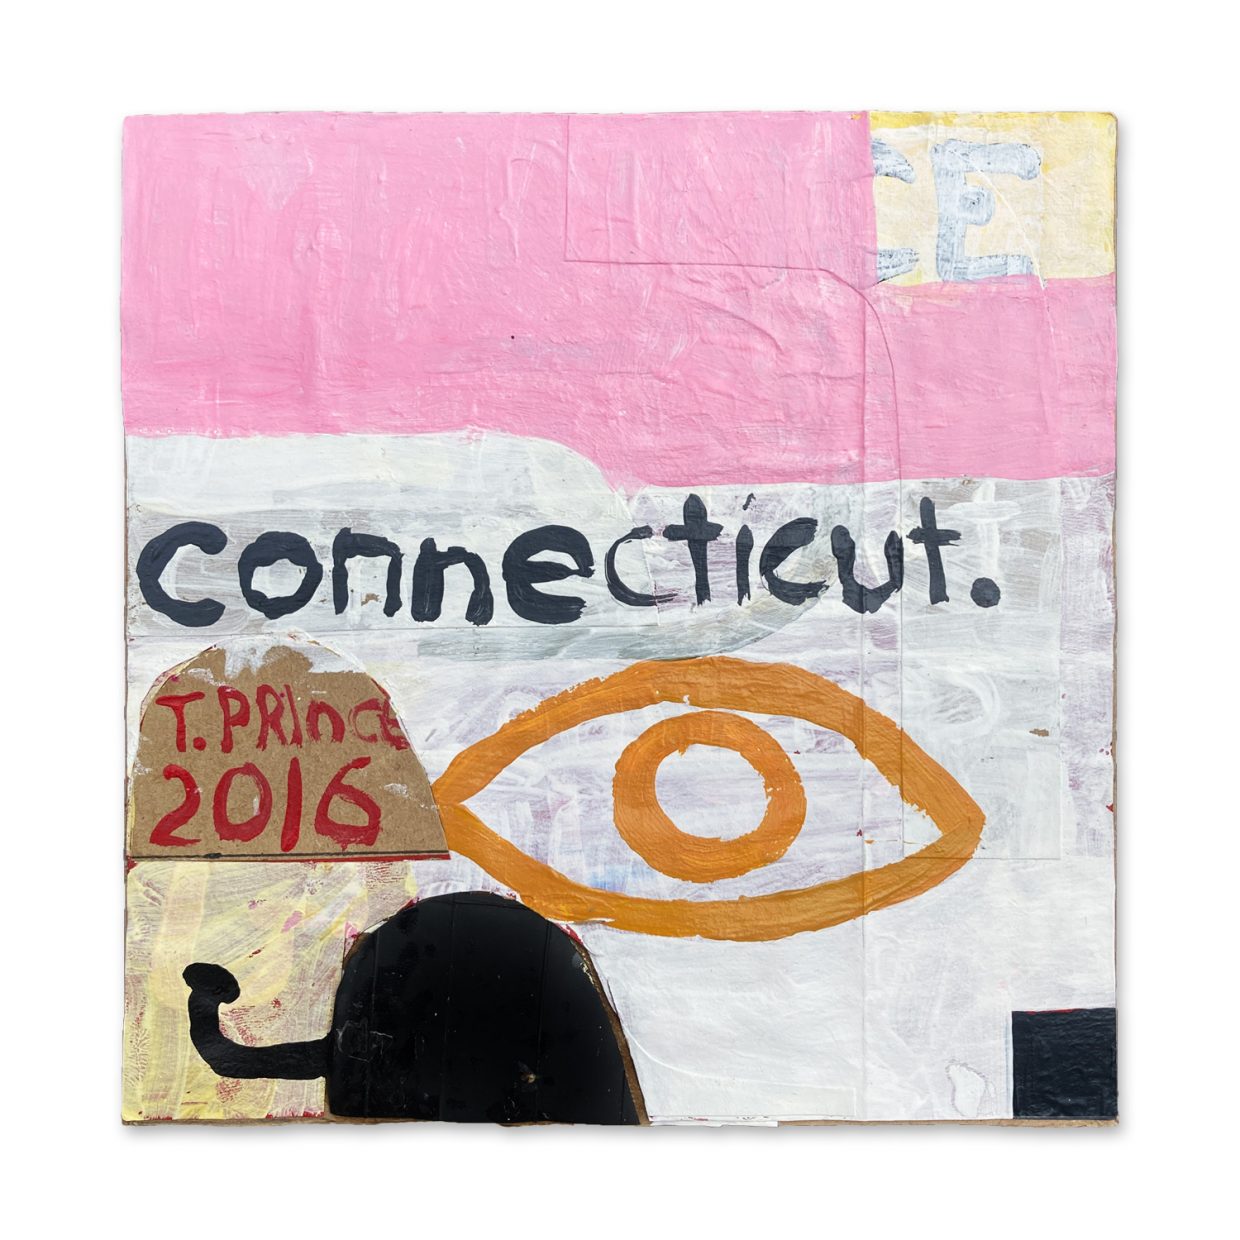 2016 Connecticut painting by Tim Thayer